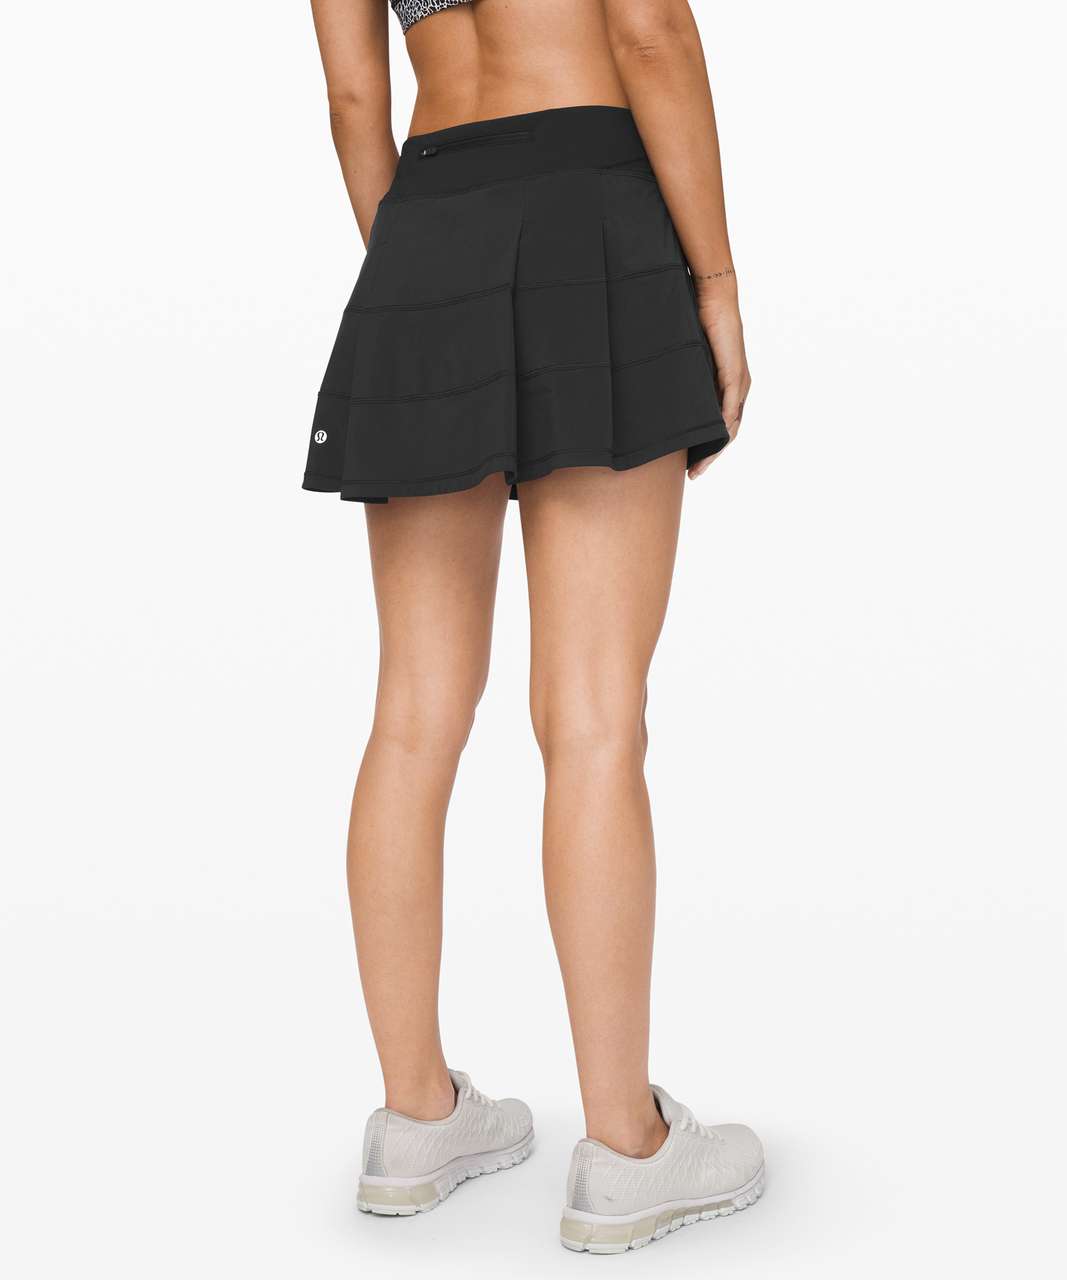 pace rival skirt